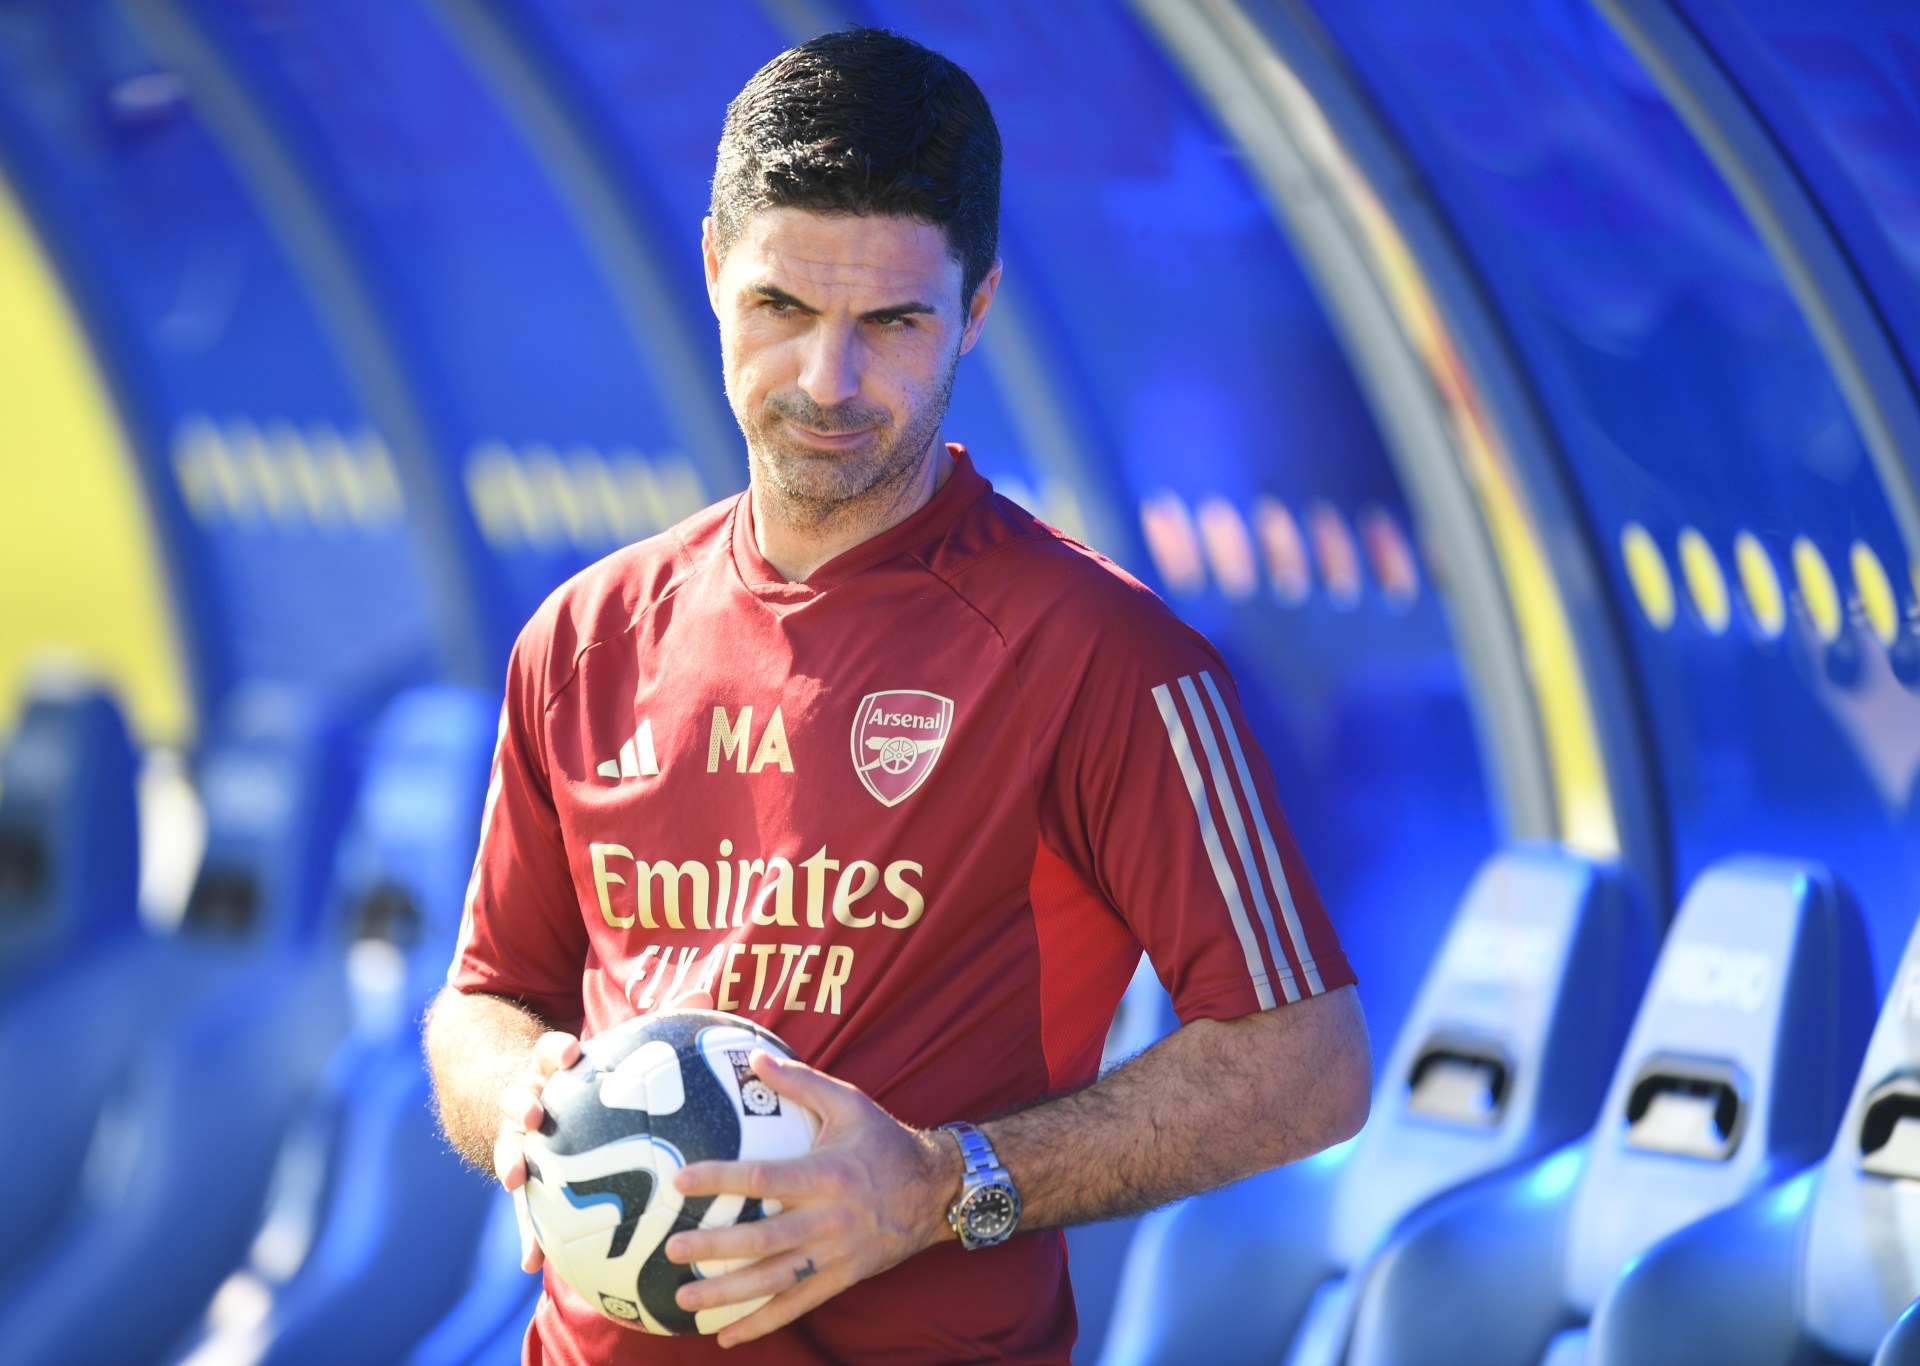 mikel arteta says arsenal are the best team in the premier league at all but one thing